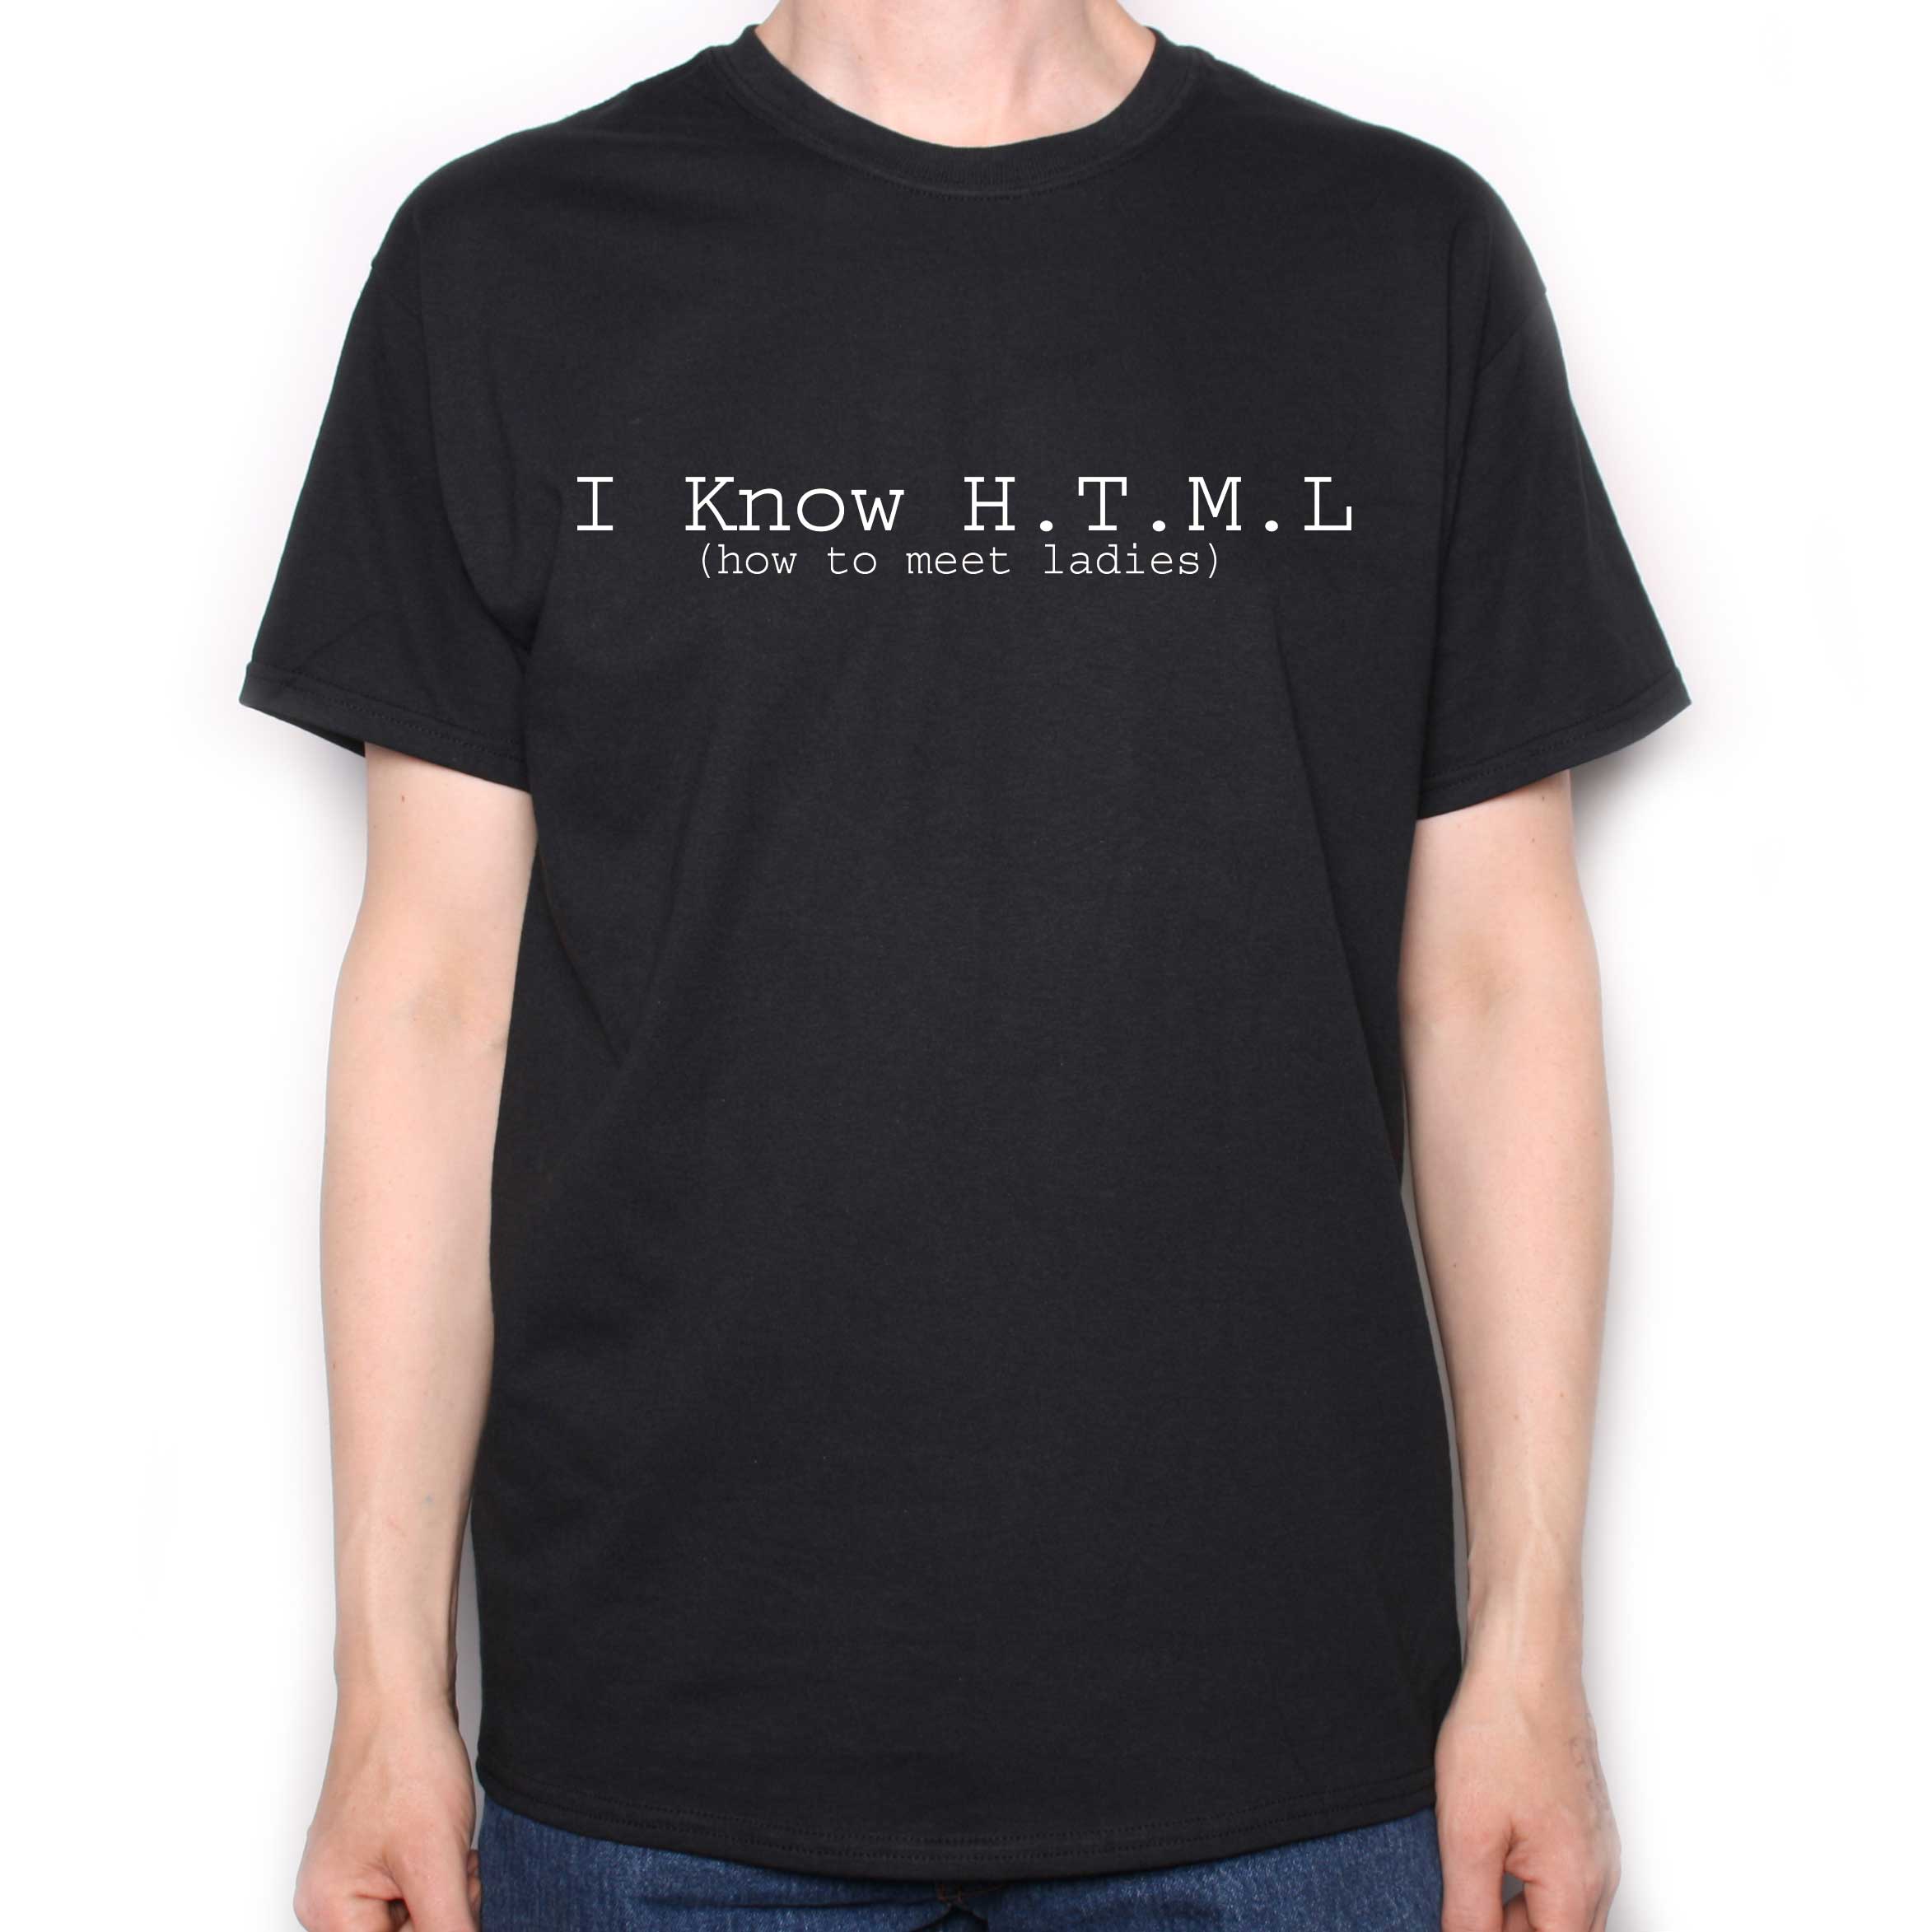 I Know H.T.M.L. (How To Meet Ladies) T shirt as seen in Silicon Valley